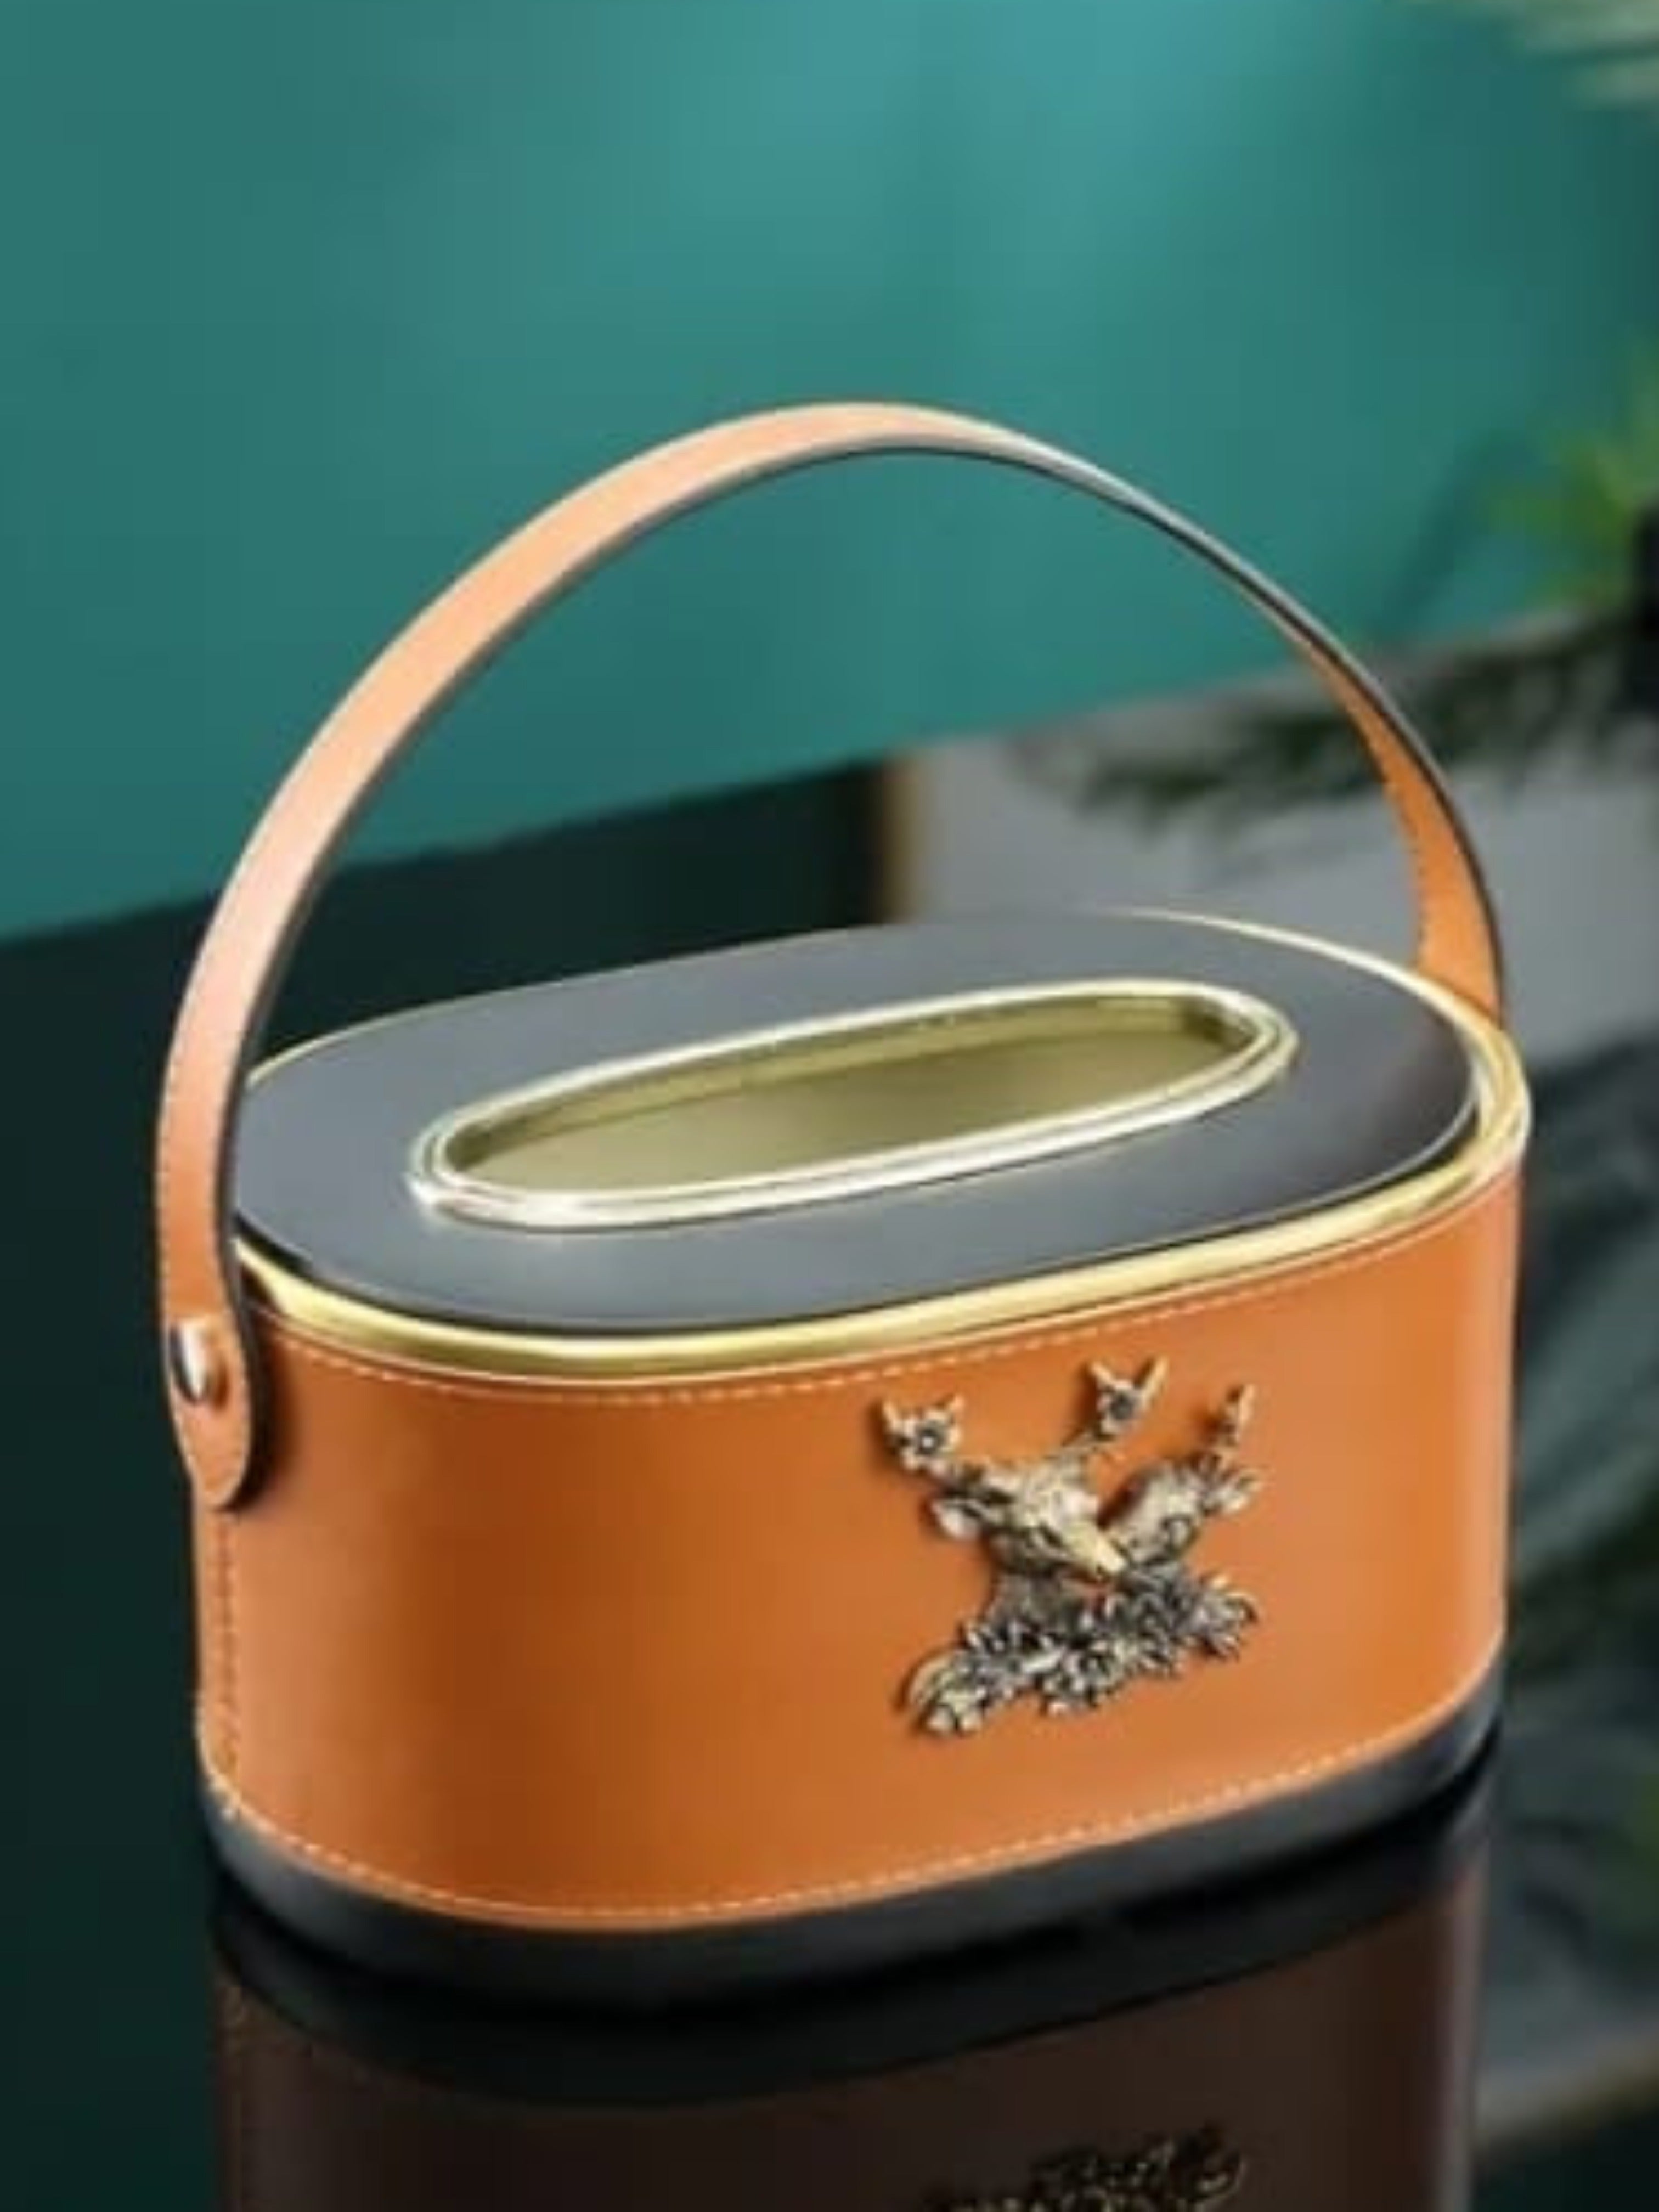 Leather Stag Tissue Box